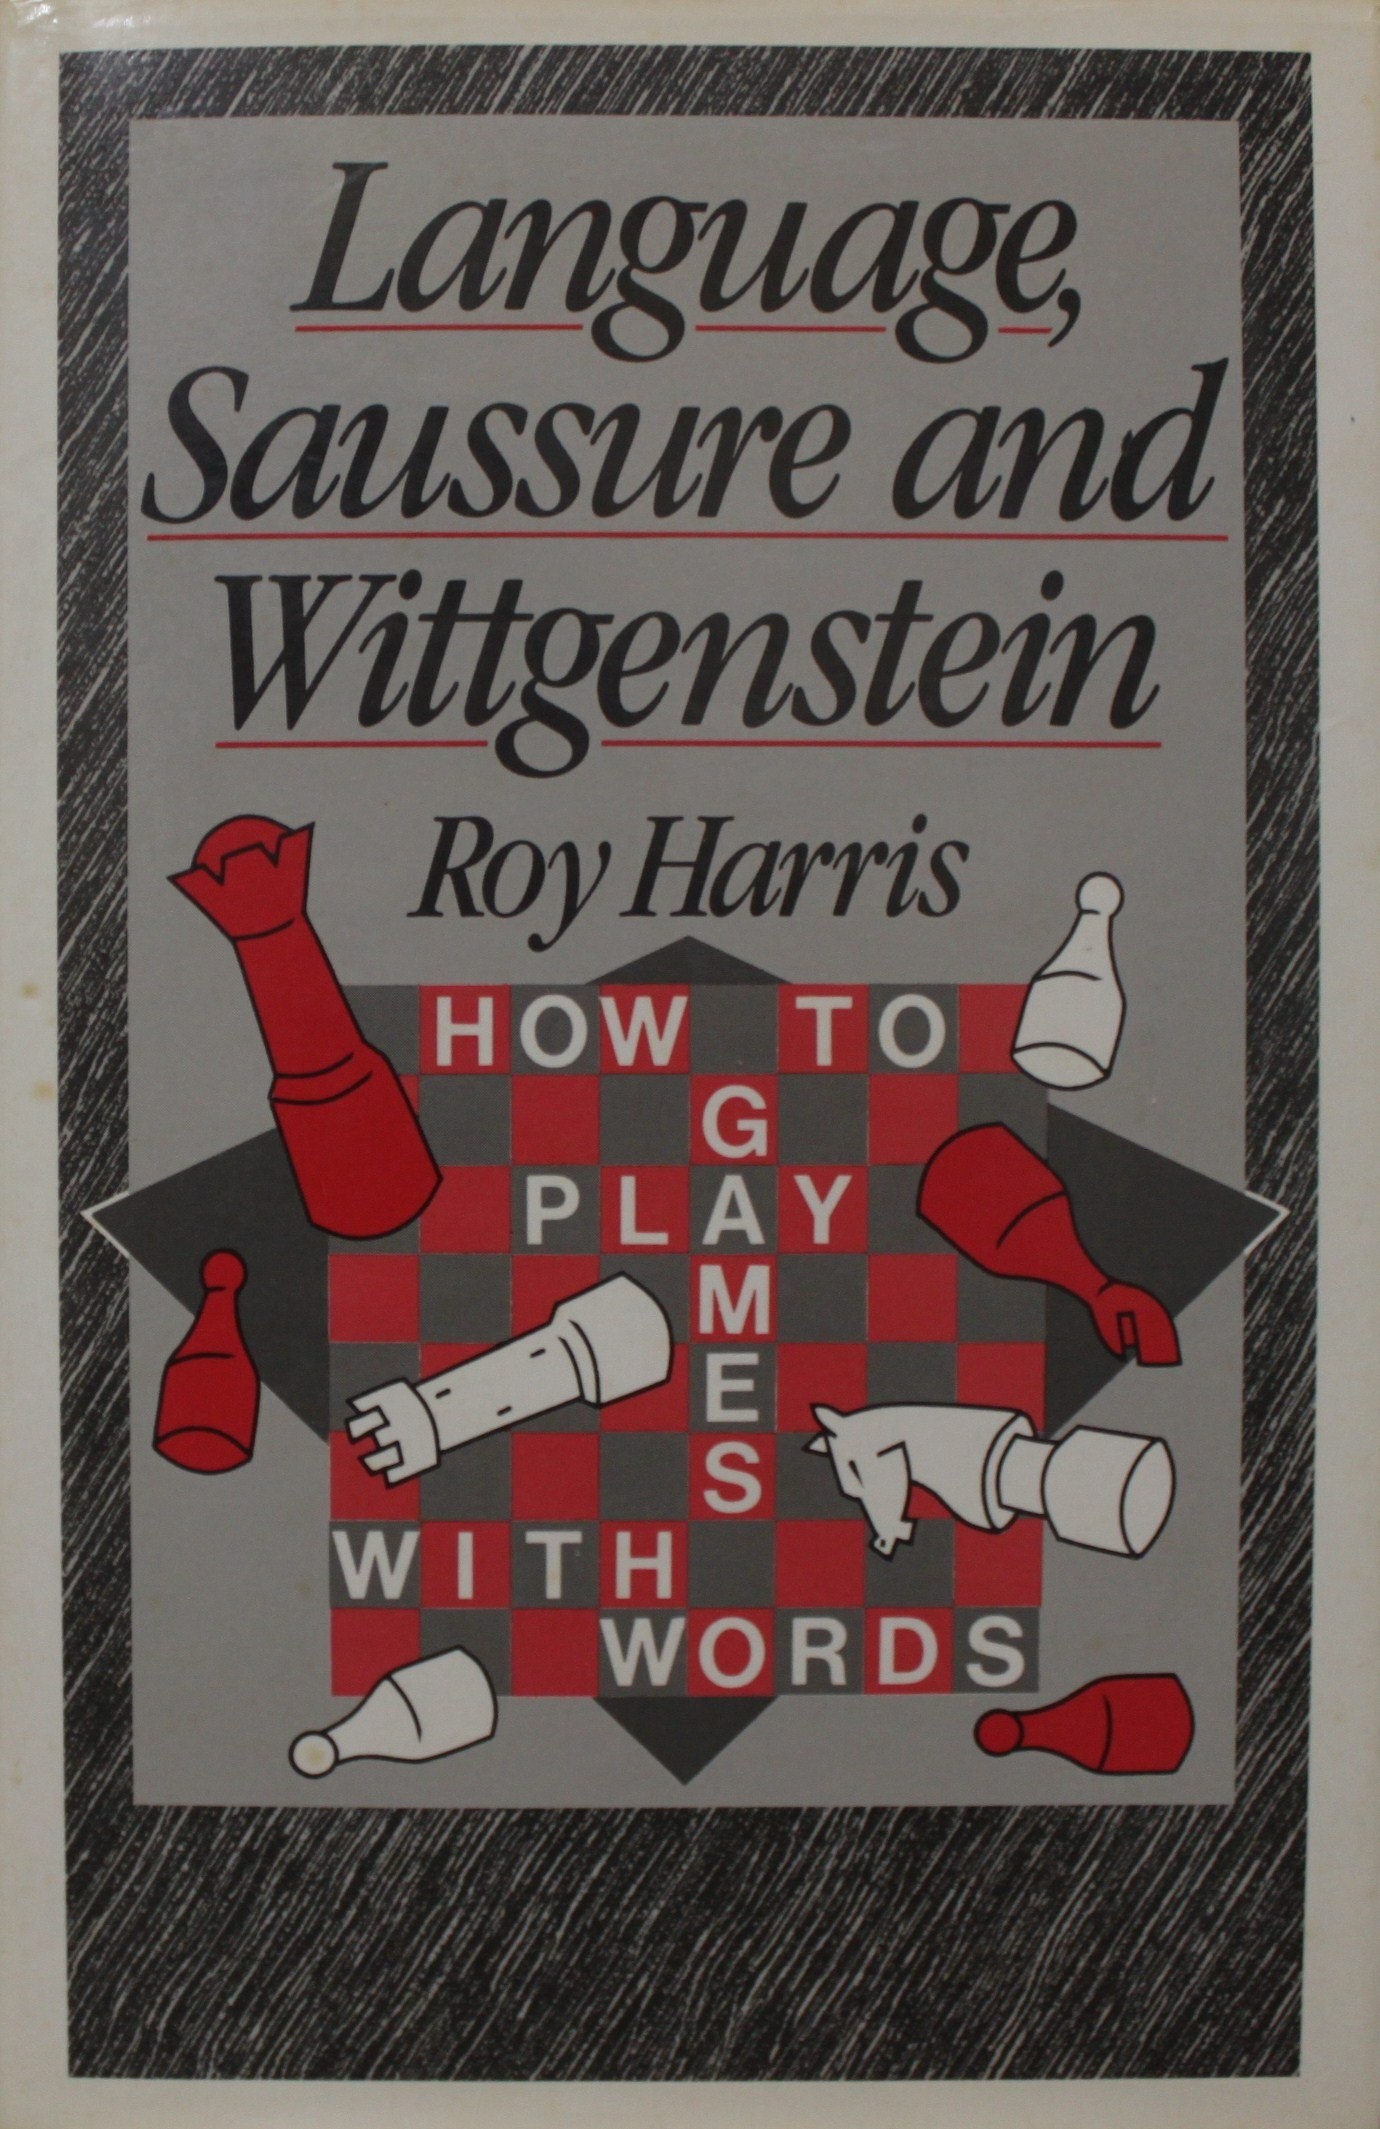 Language, Saussure and Wittgenstein: How to Play Games with Words